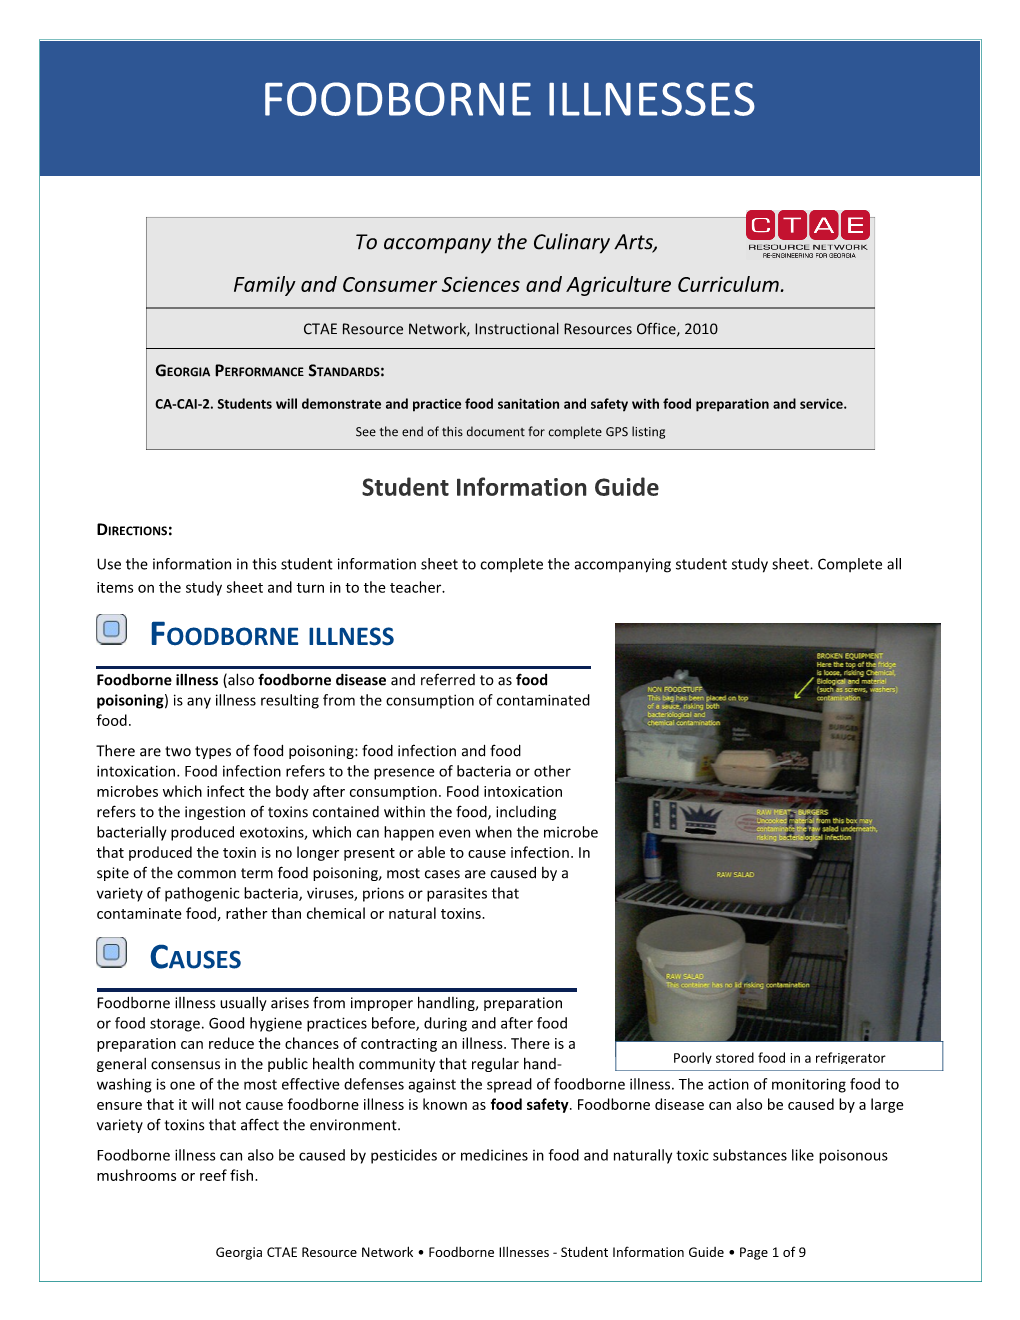 Student Information Guide s1